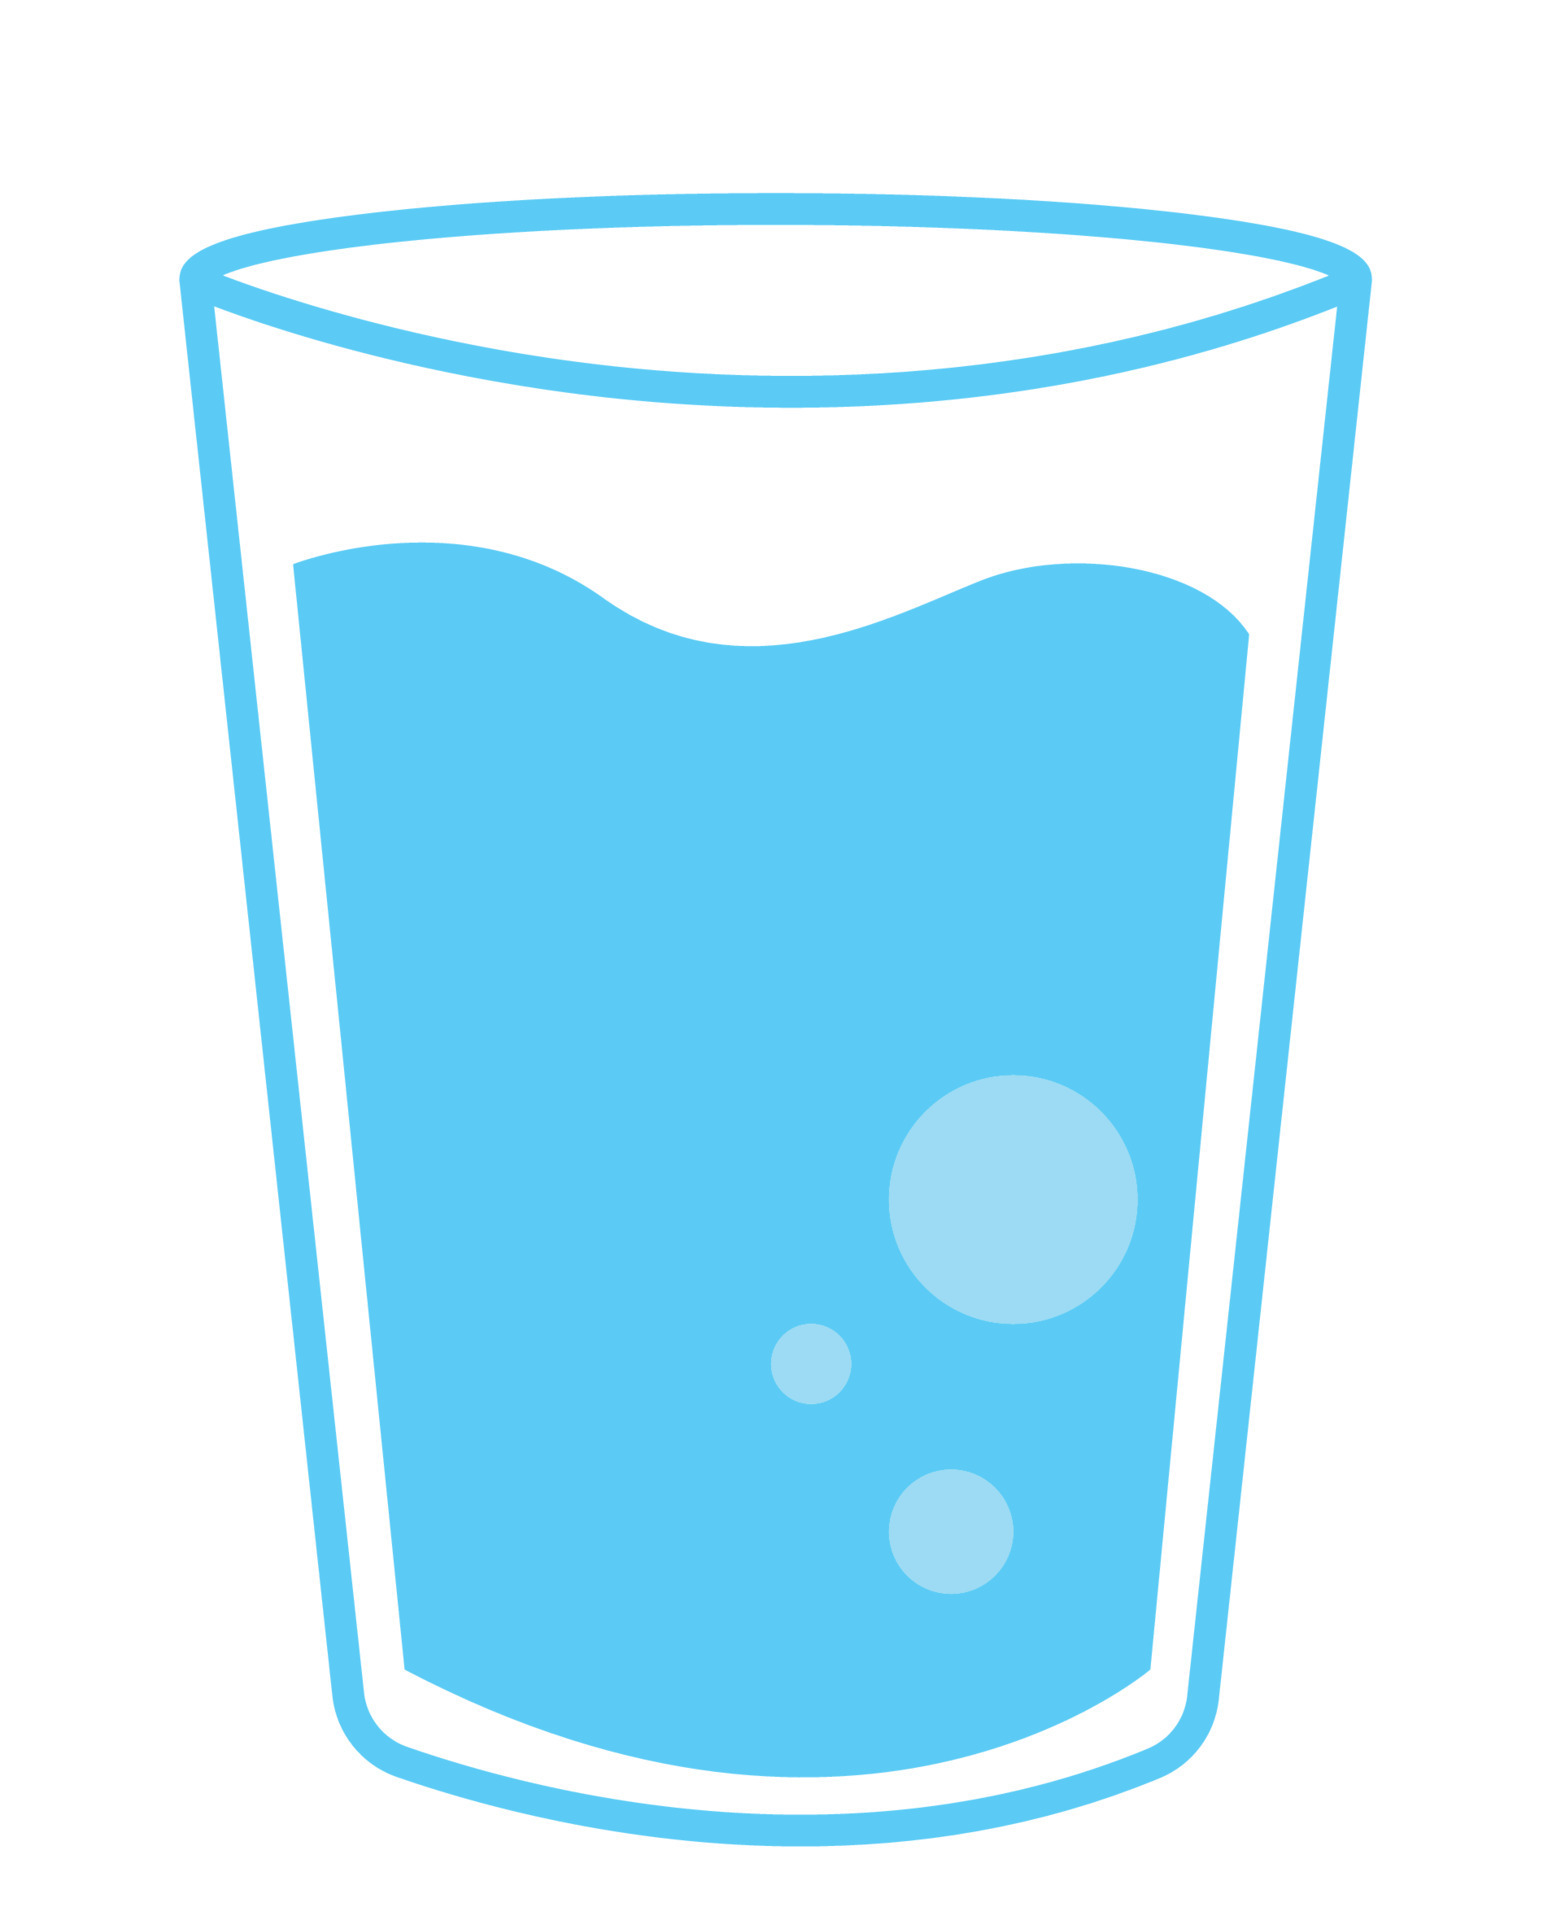 https://static.vecteezy.com/system/resources/previews/011/117/793/original/water-glass-icon-free-vector.jpg